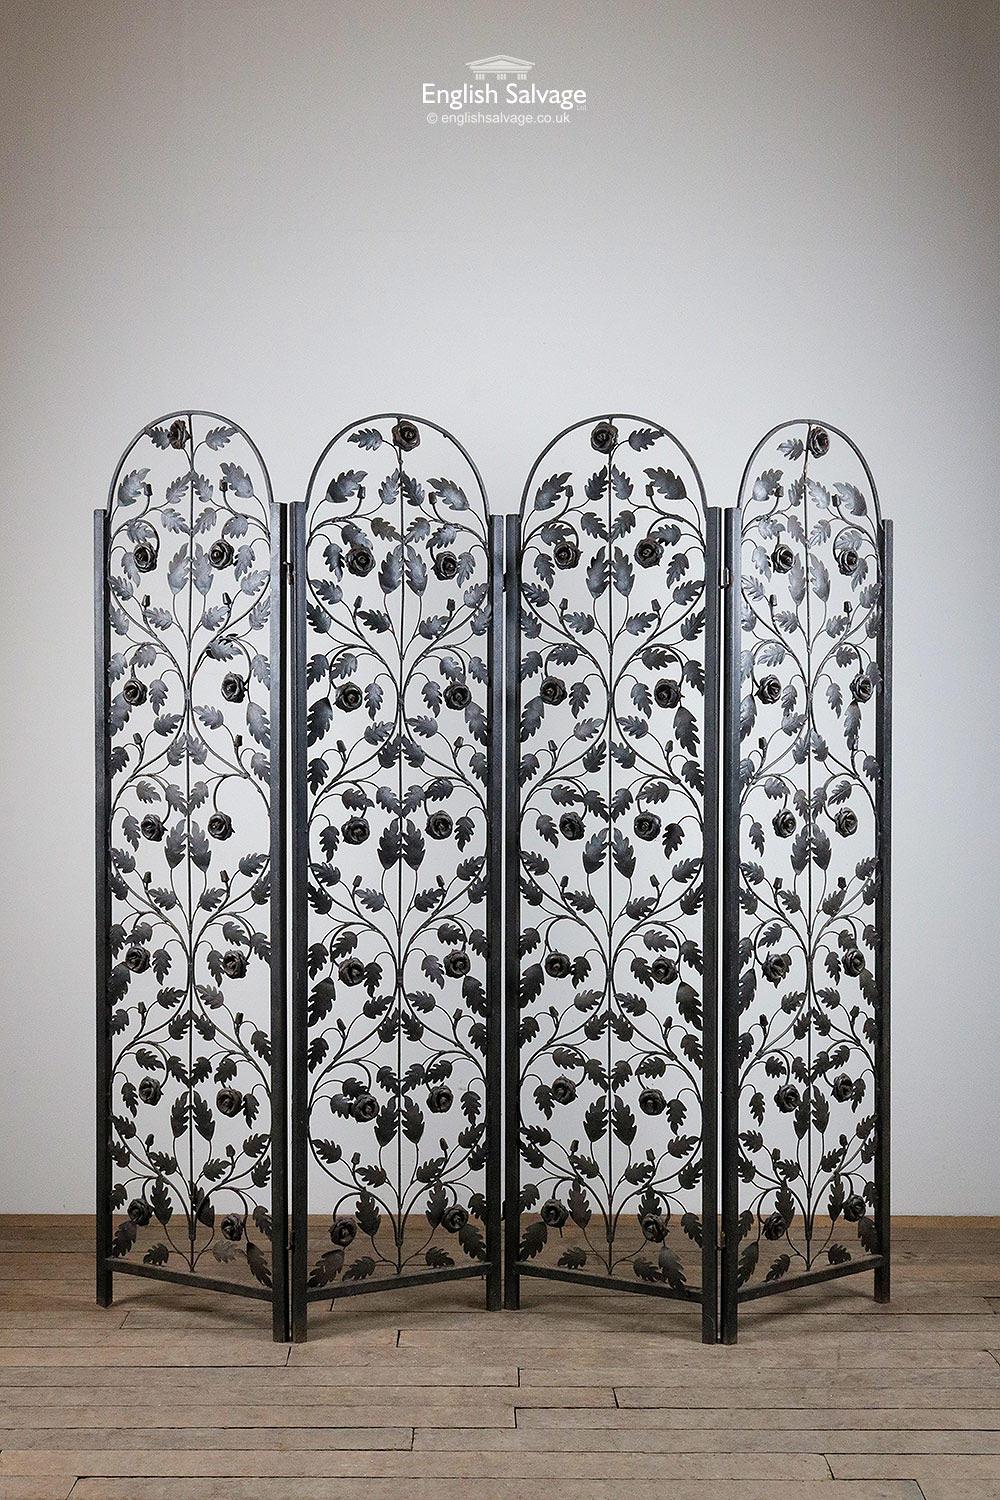 Ironwork four part folding screen / room divider with arched top detail. Pretty floral and foliate design throughout. Painted black, there is some surface rust and bends to the metal in places. The four sections (each measure 47.5cm wide) come